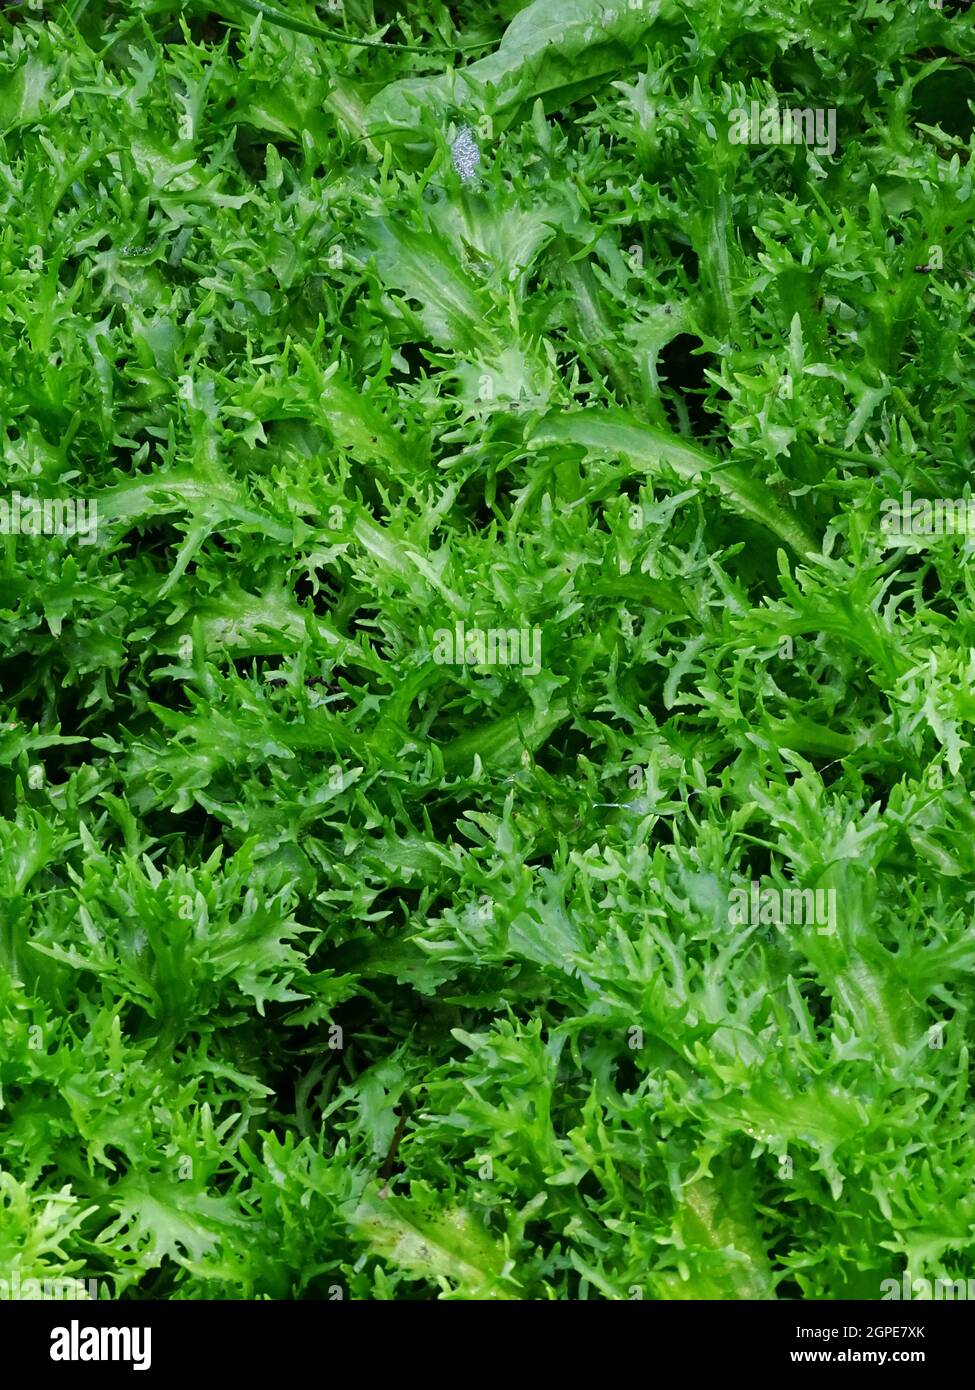 close up of curly endive in the vegetable garden (Cichorium endivia var. crispum), with green and light green colors Stock Photo